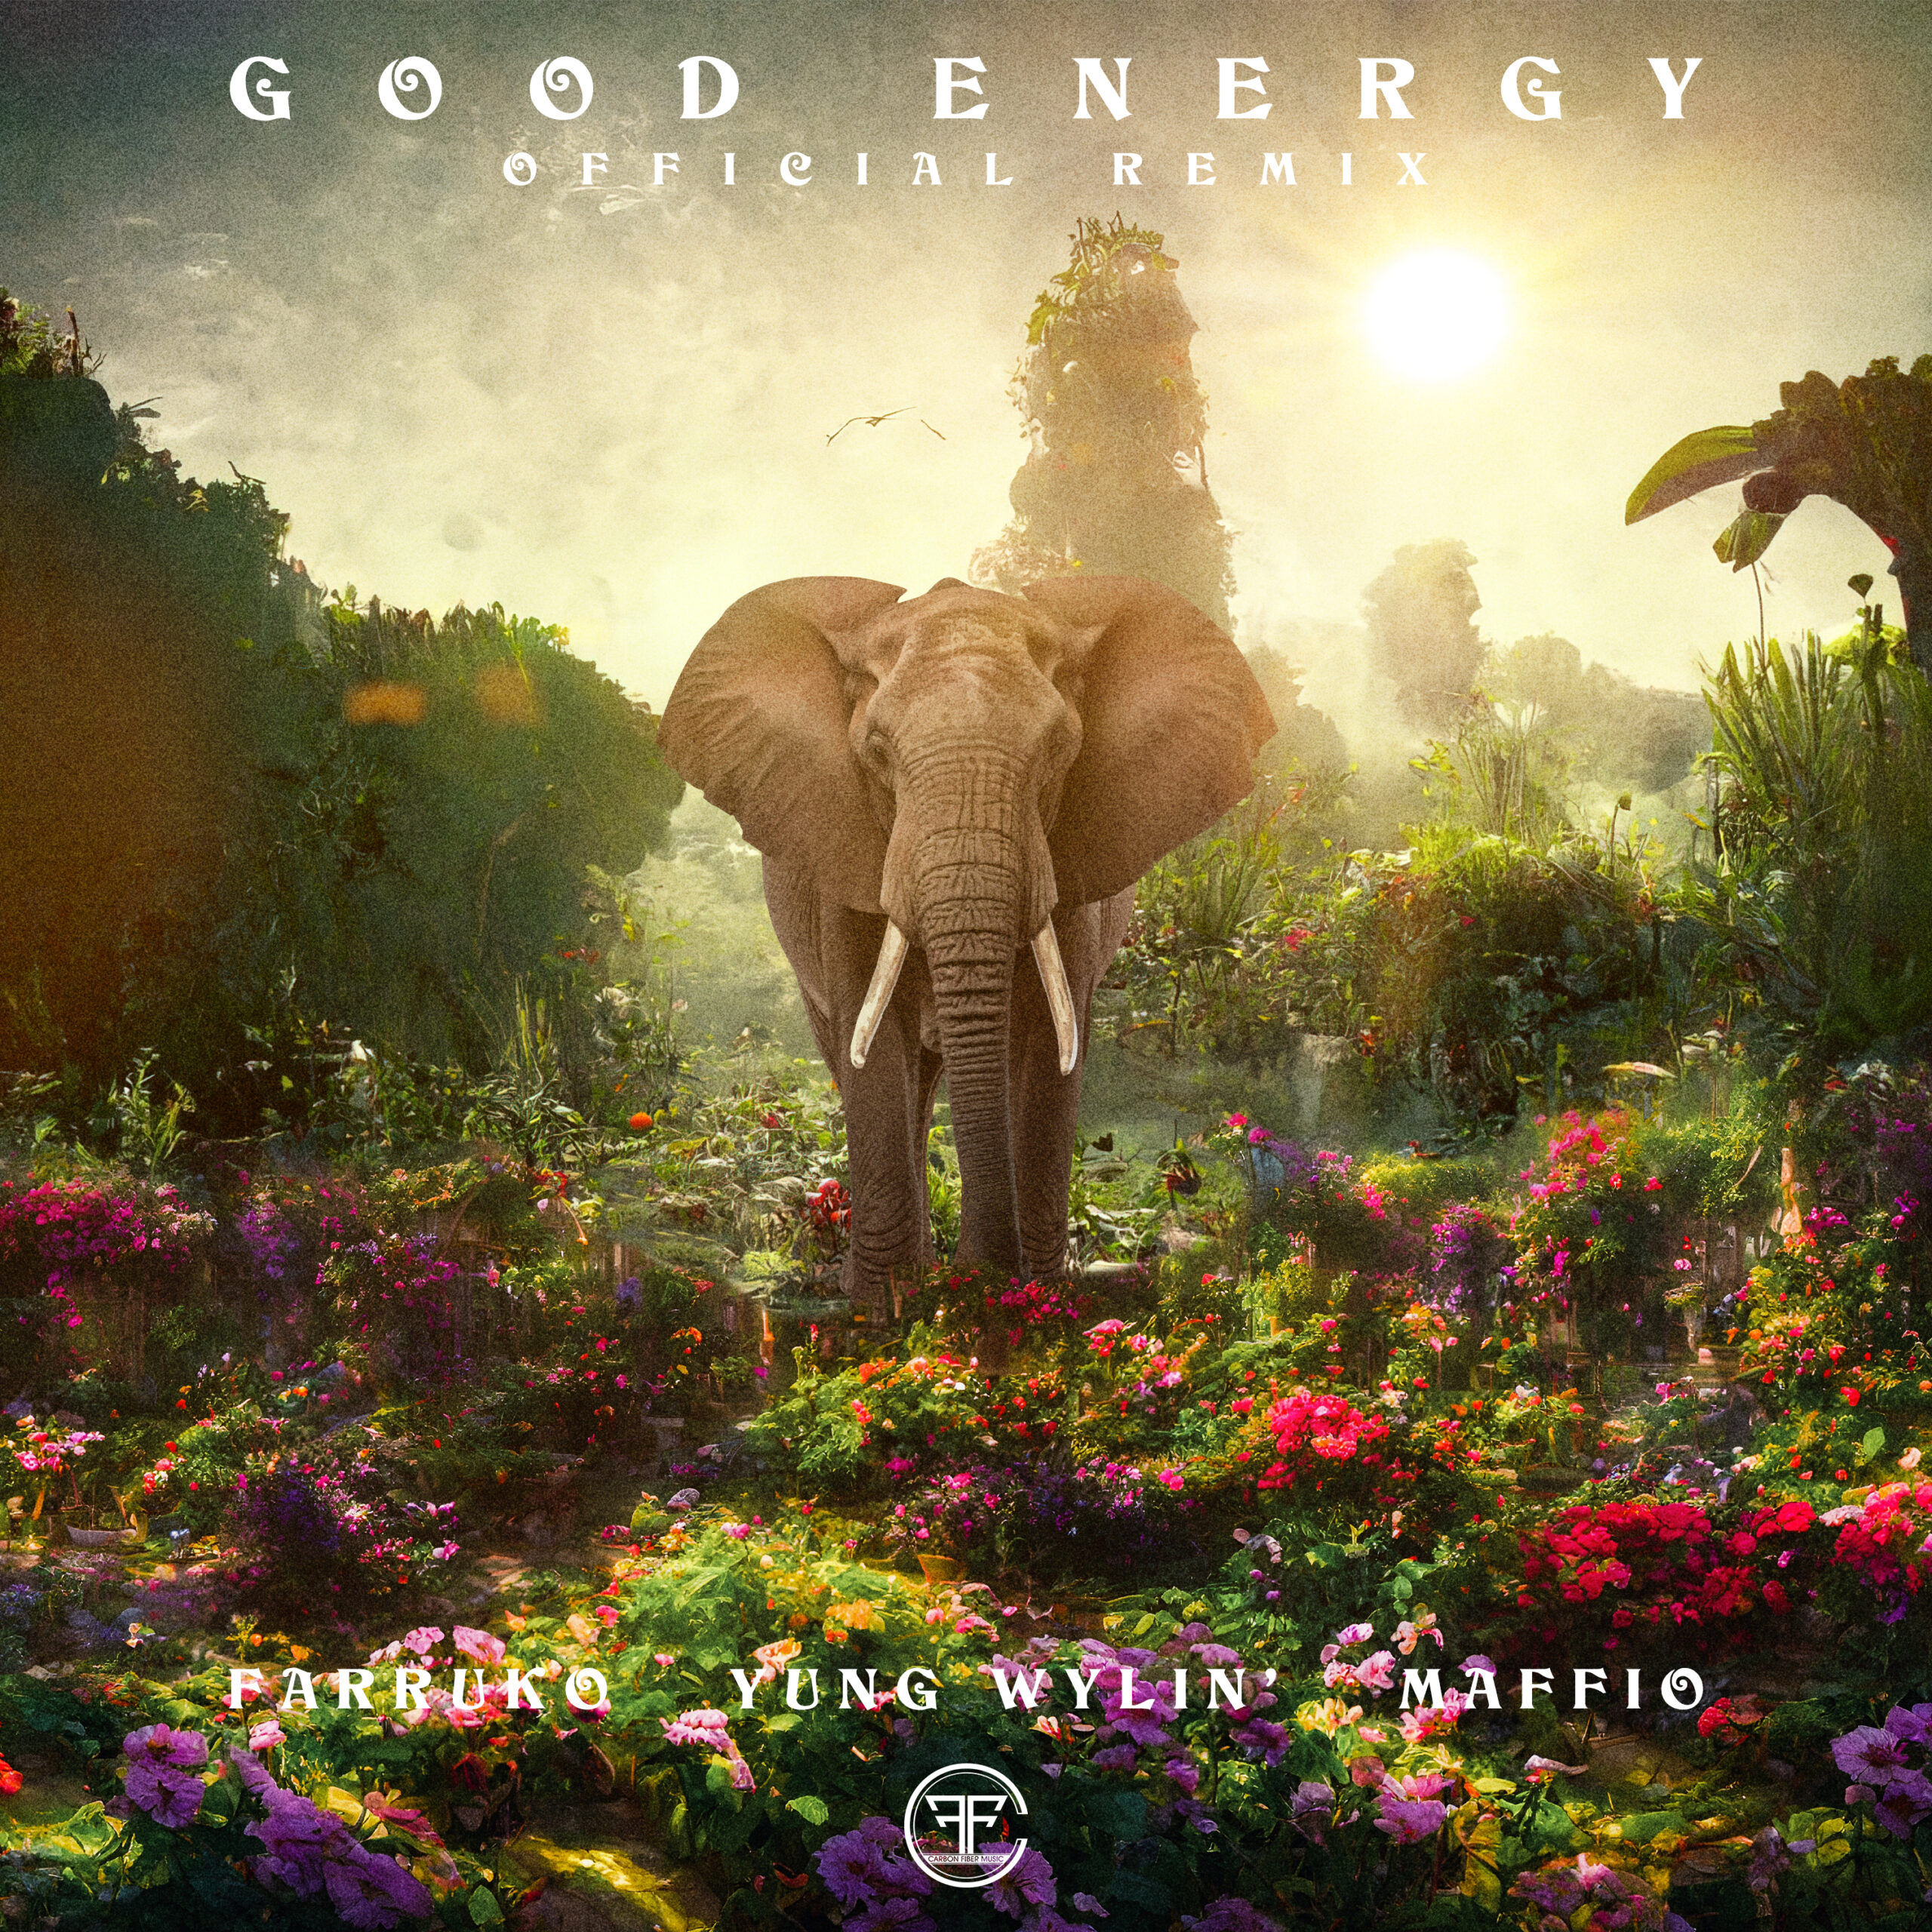 Farruko, Yung Wylin’, and Maffio Unite to Deliver “Good Energy (Remix)”